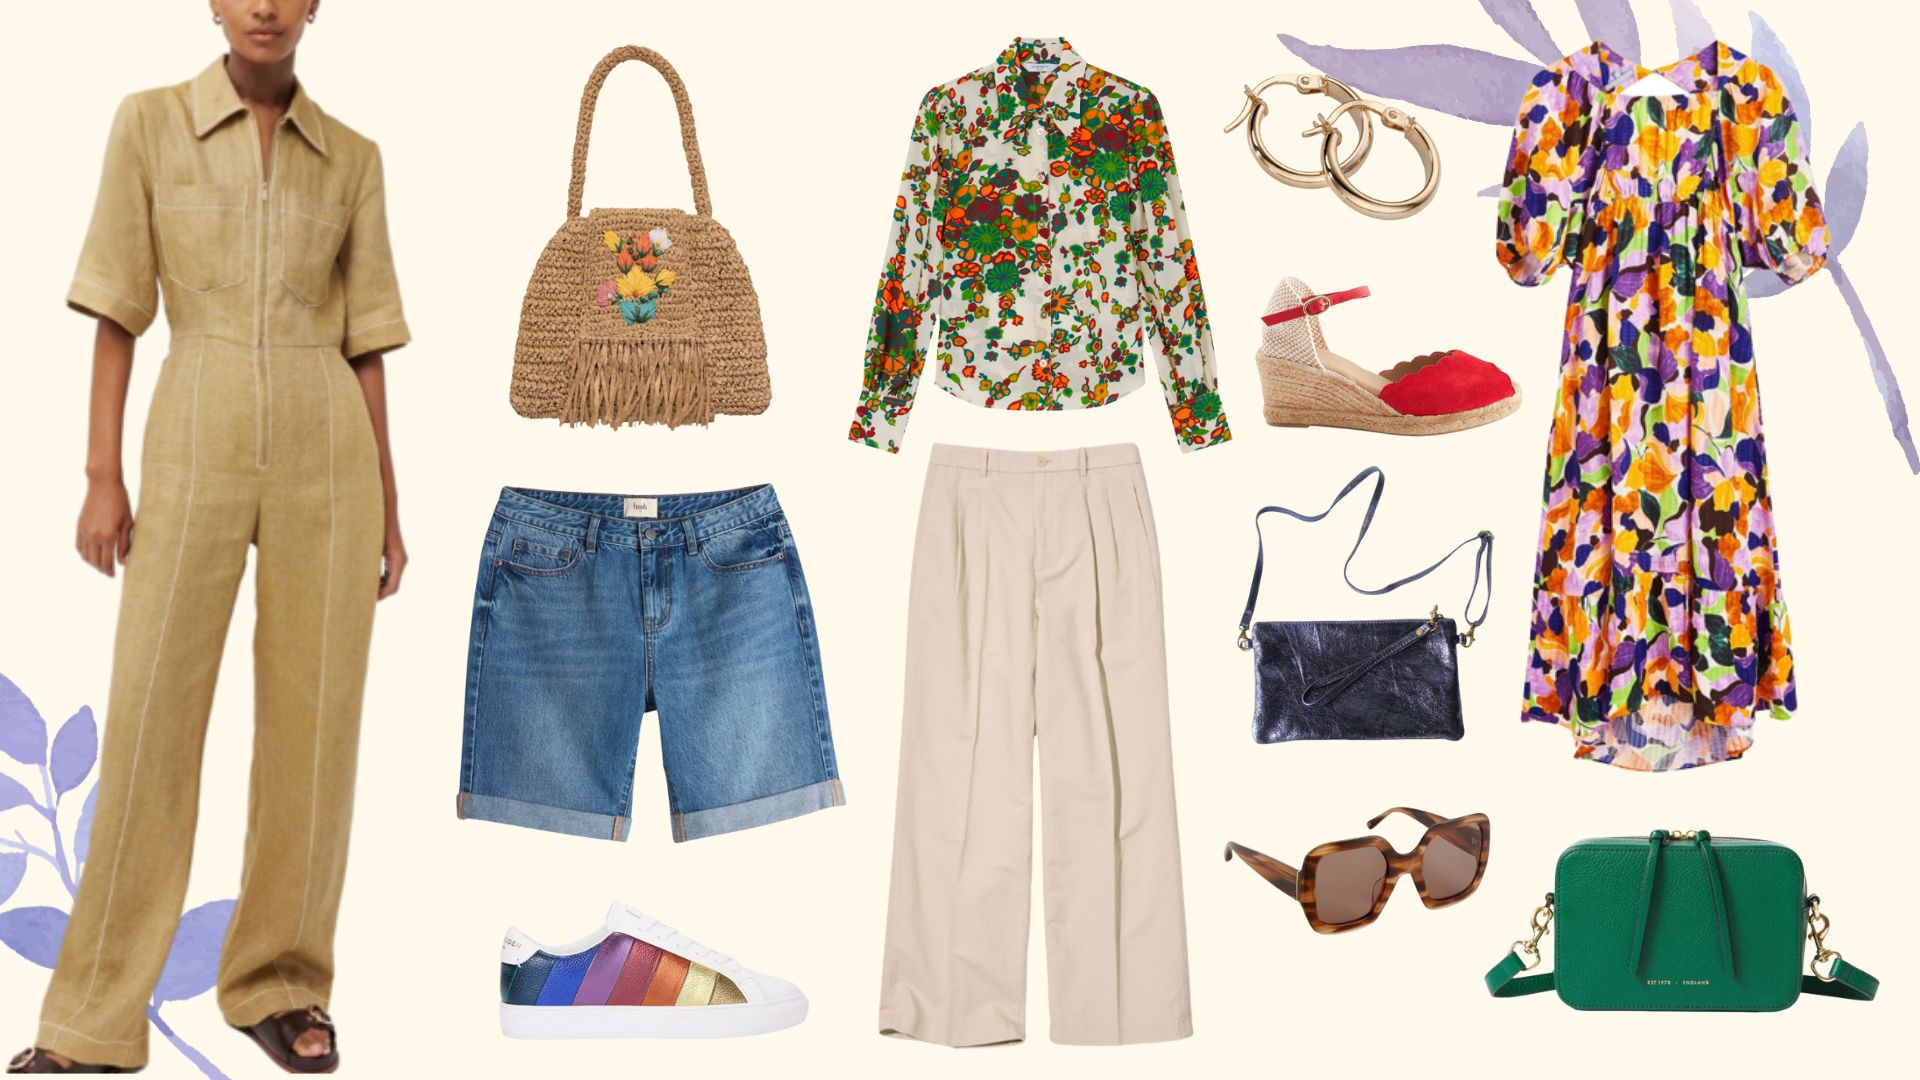 Summer outfit ideas for women over 50 for easy breezy style